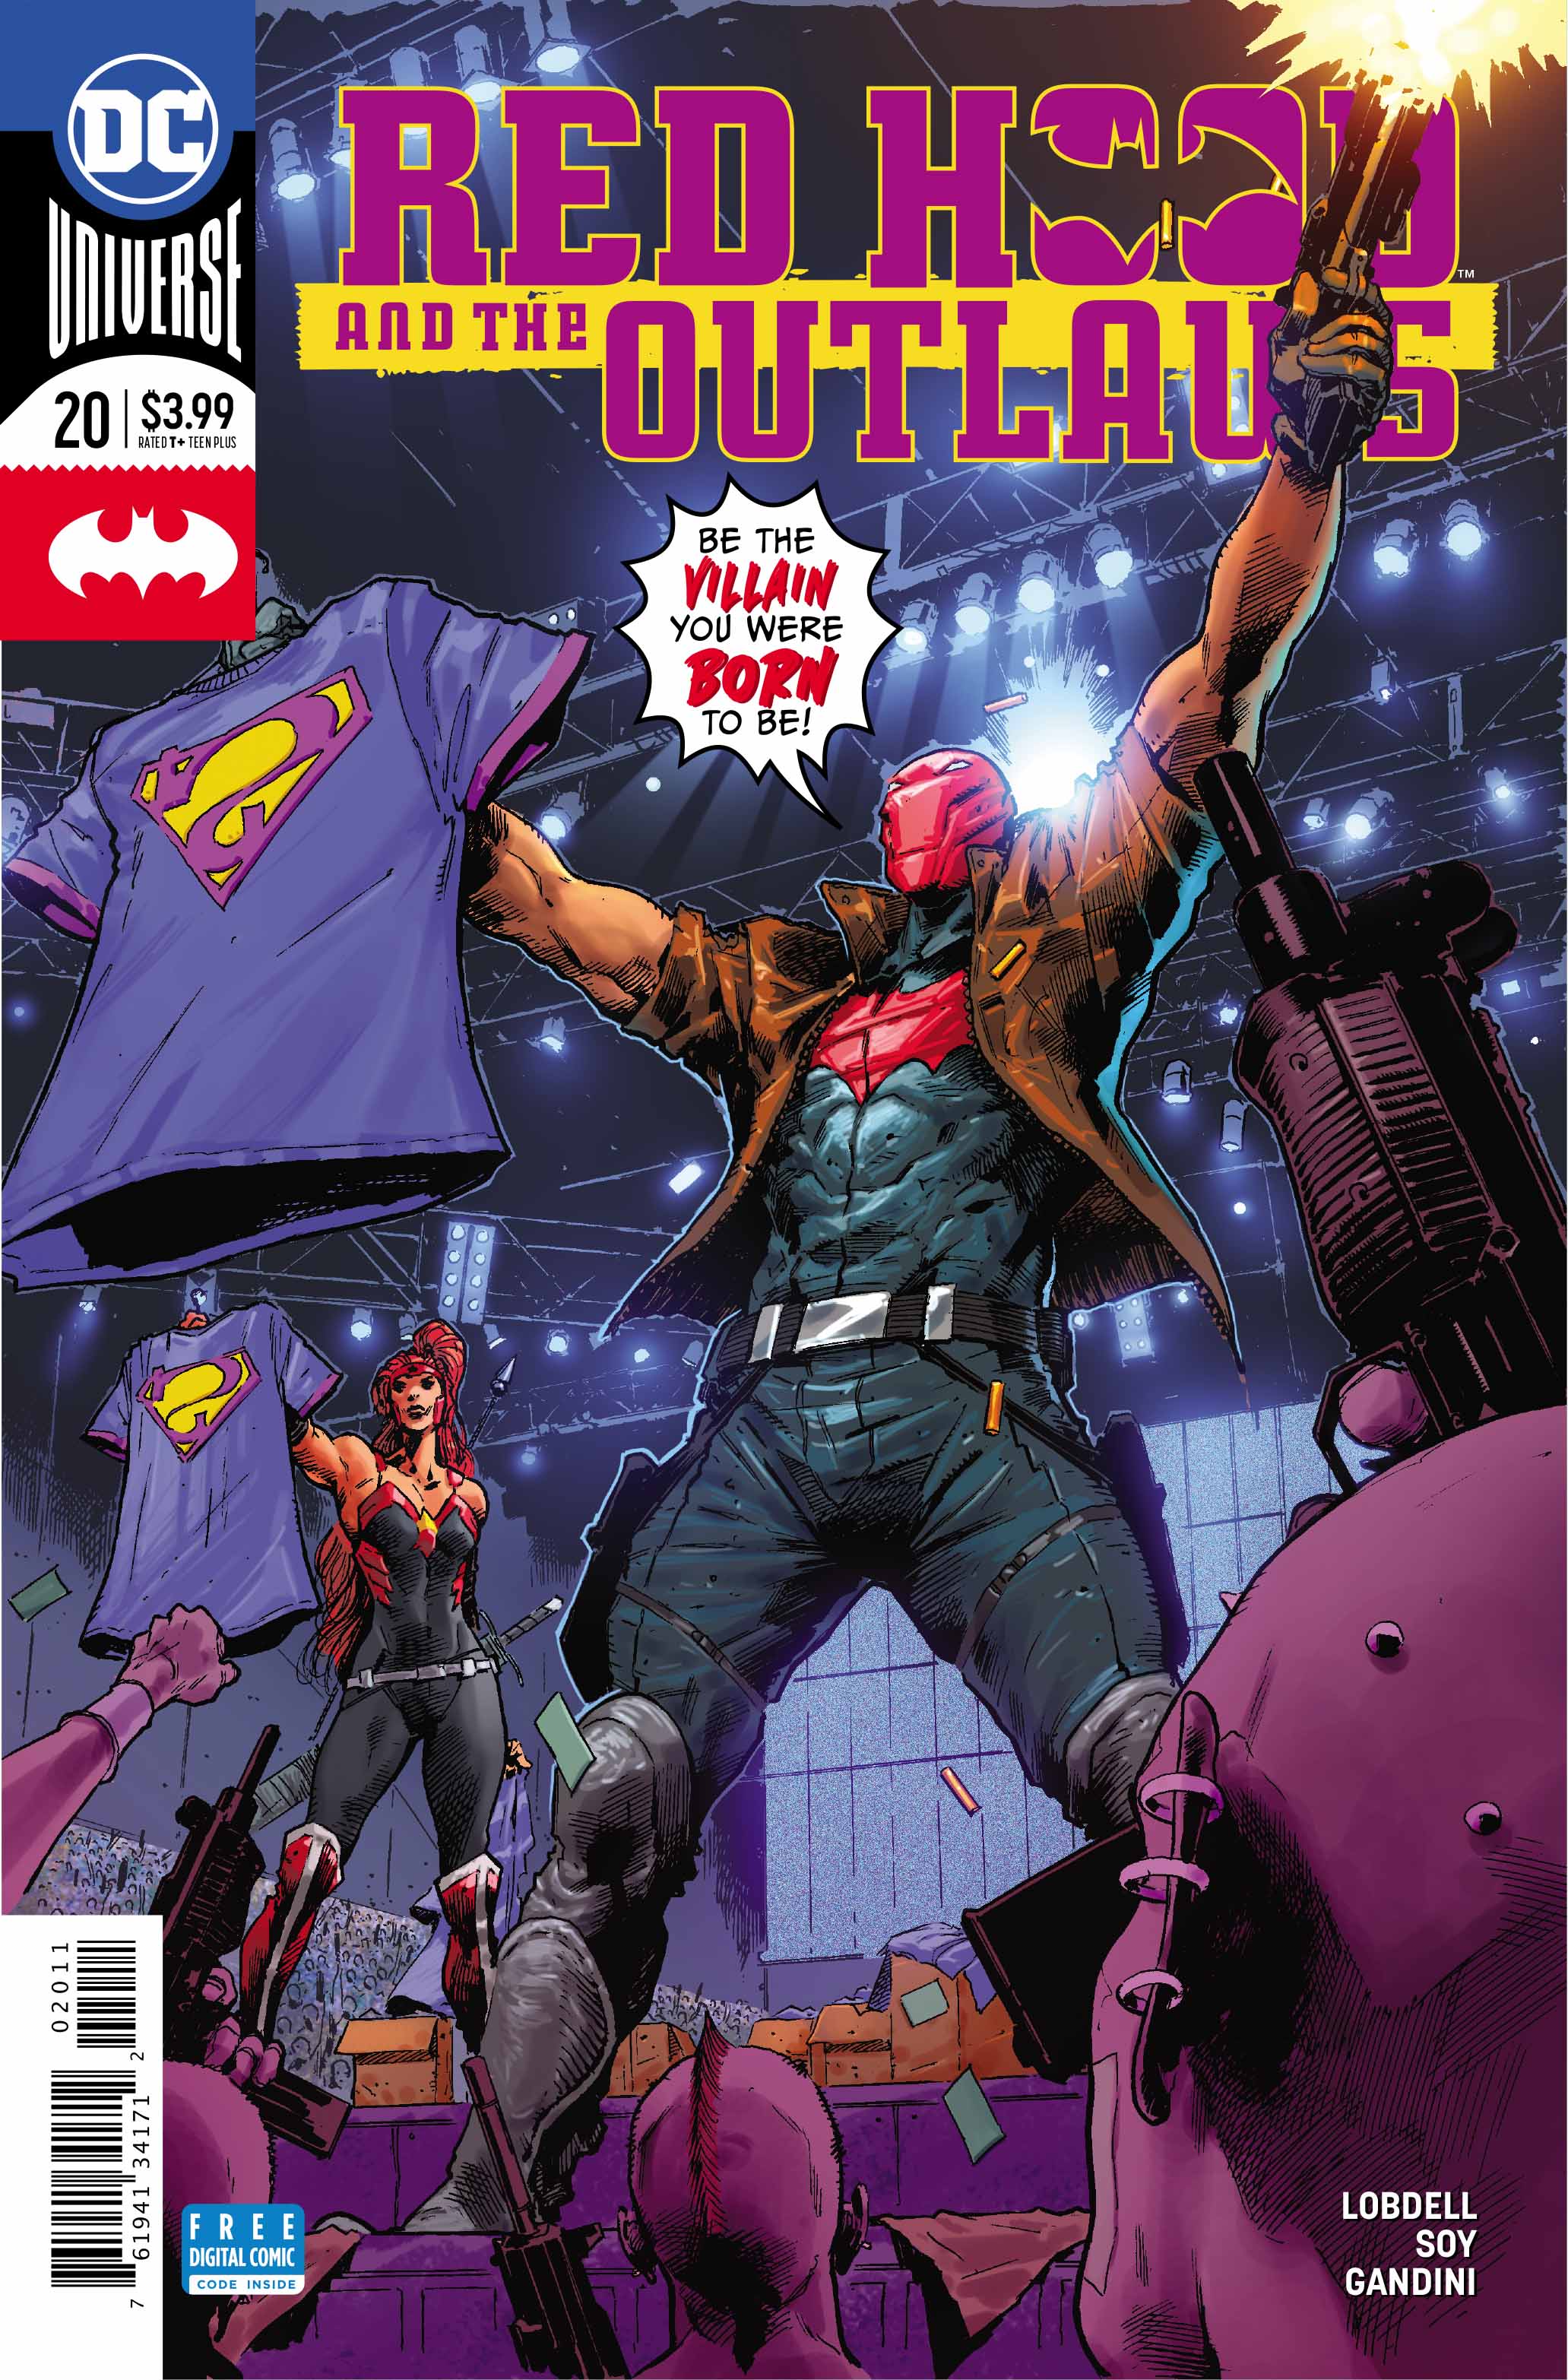 Red Hood and the Outlaws #20 Review: Continuing a poor arc that just needs to end already